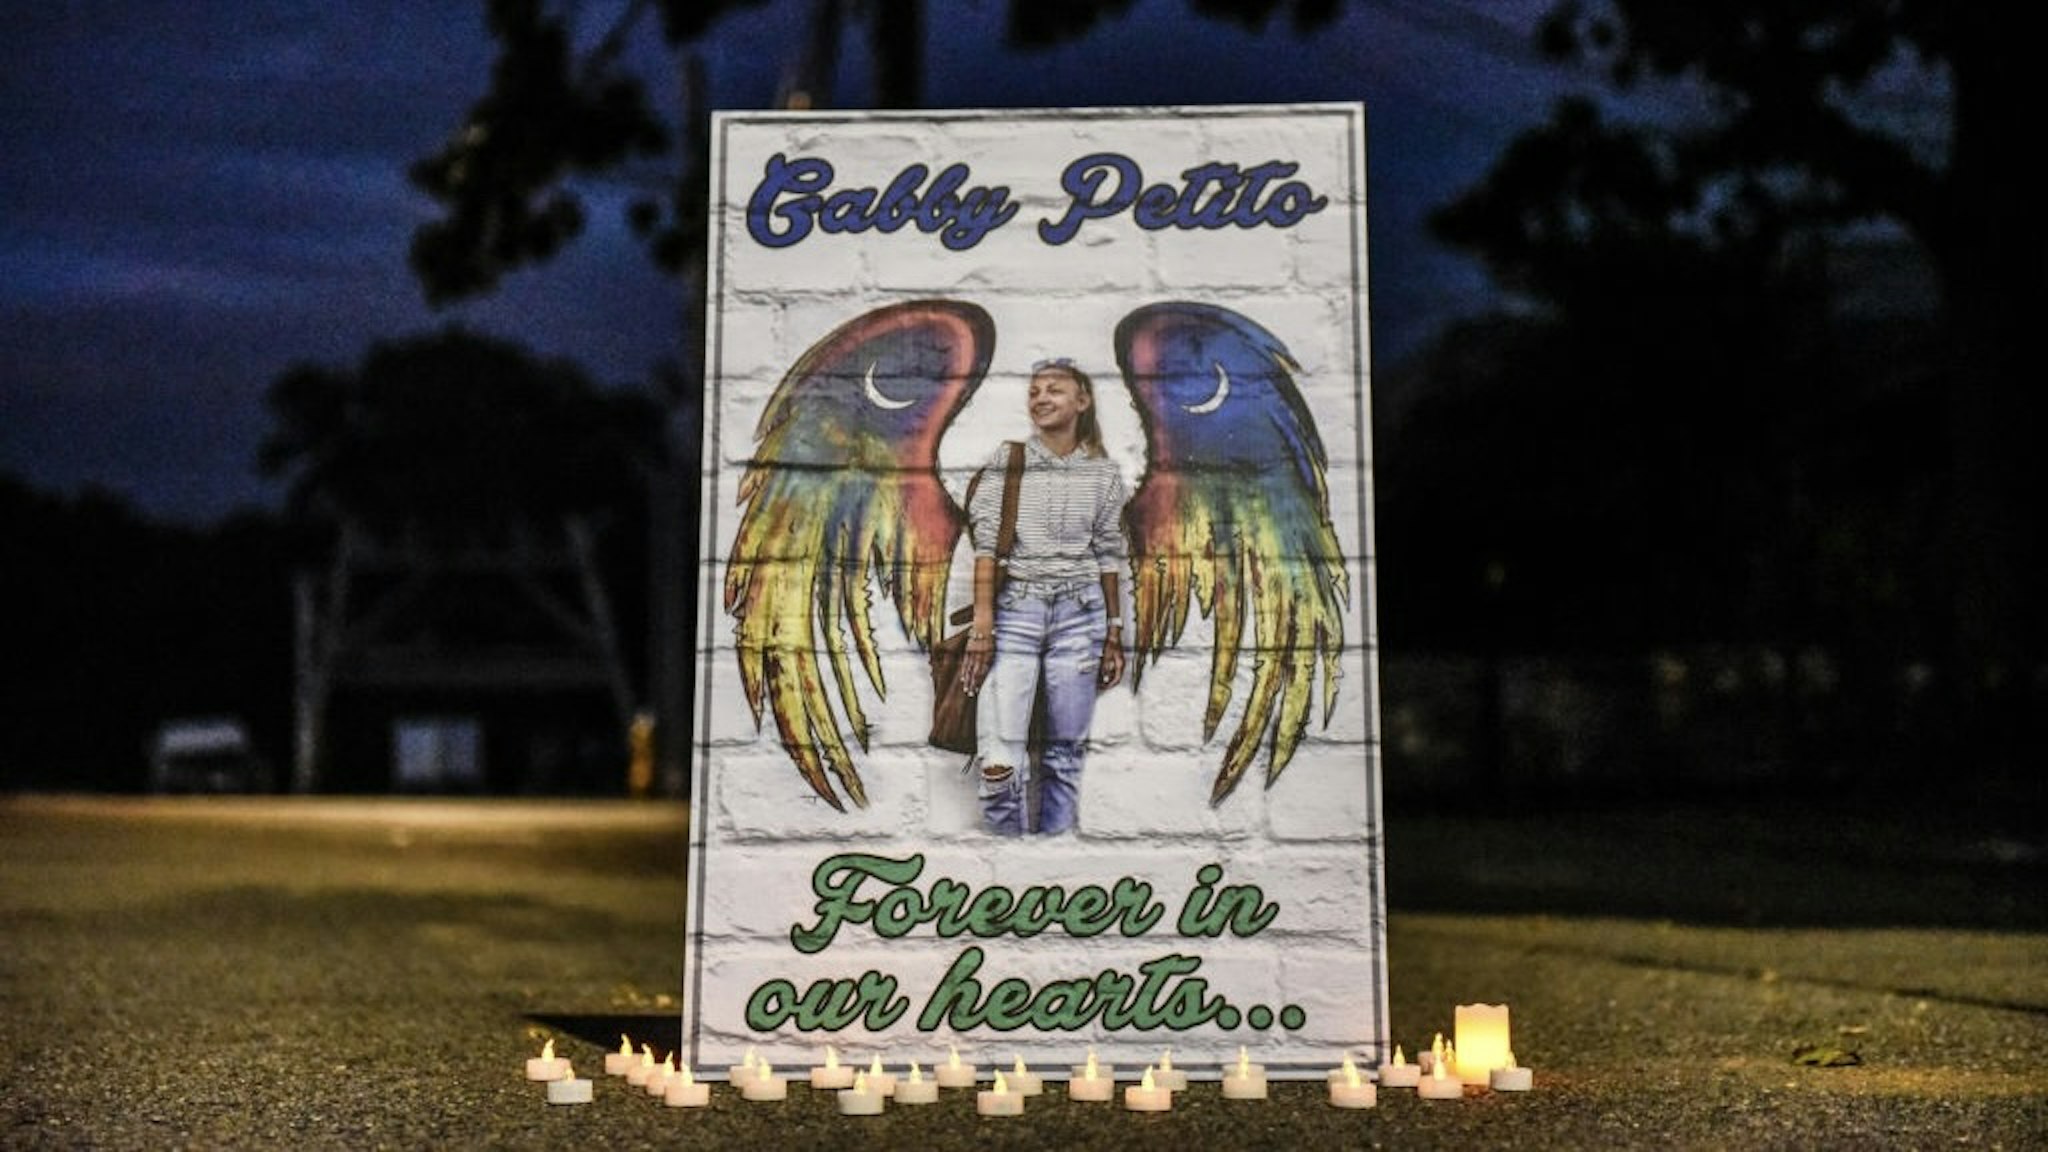 Gabby Petito's Hometown Of Blue Point, Long Island Mourns Her Death BLUE POINT, NY - SEPTEMBER 24: A sign honors the death of Gabby Petito on September 24, 2021 in Blue Point, New York. Gabby Petito's hometown of Blue Point put out candles along main streets and in driveways to honor the teenager who has riveted the nation since the details of her death became known. (Photo by Stephanie Keith/Getty Images) Stephanie Keith / Stringer via Getty Images